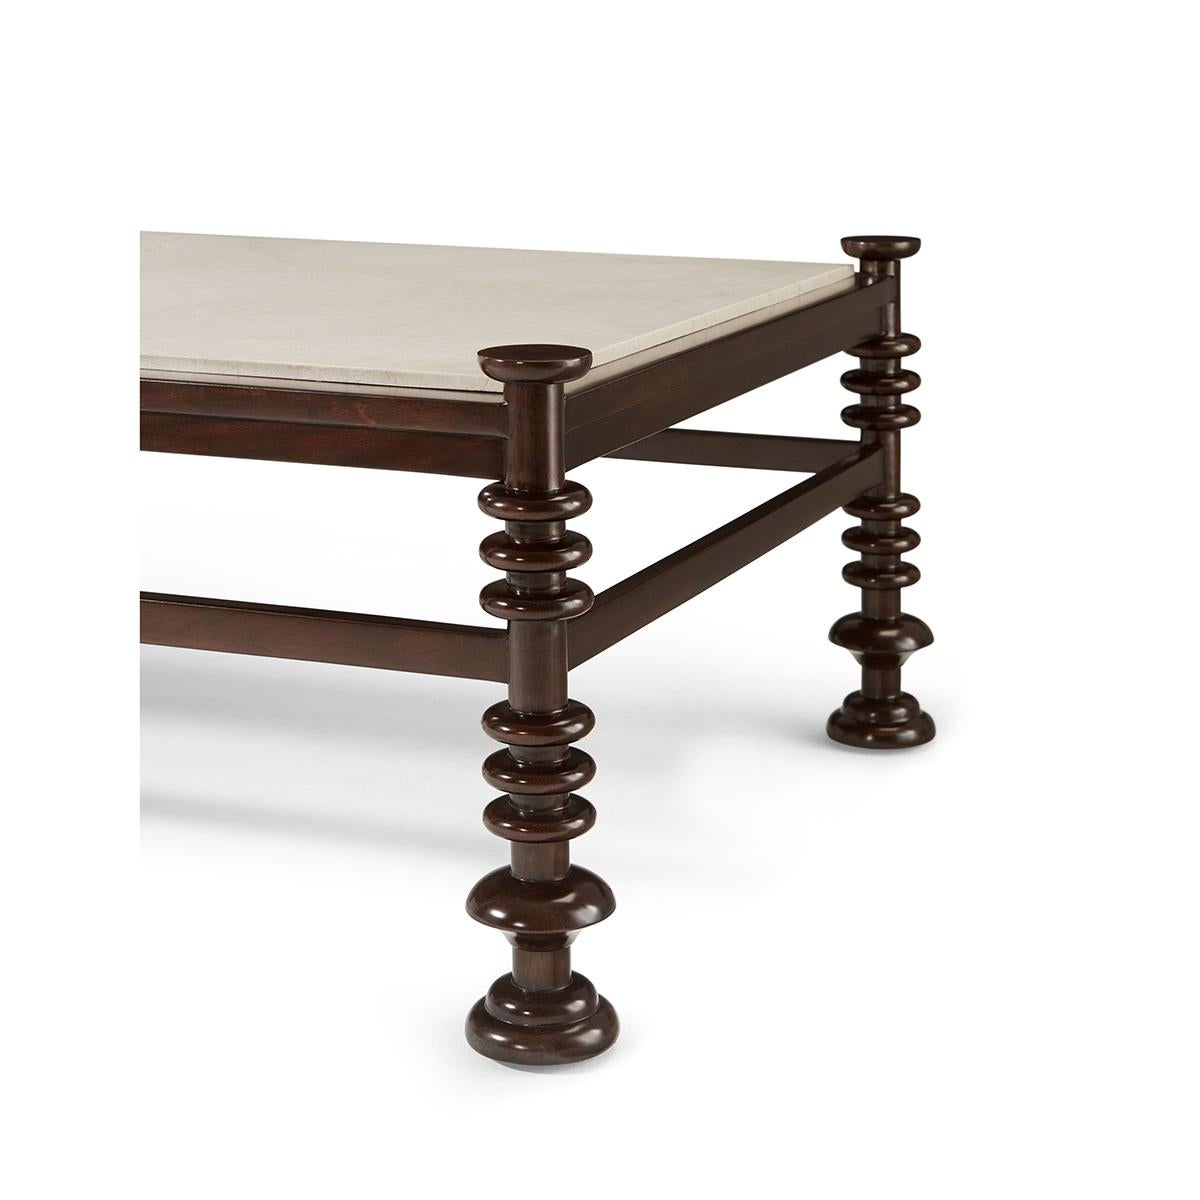 Baroque Modern Turned Leg Coffee Table For Sale